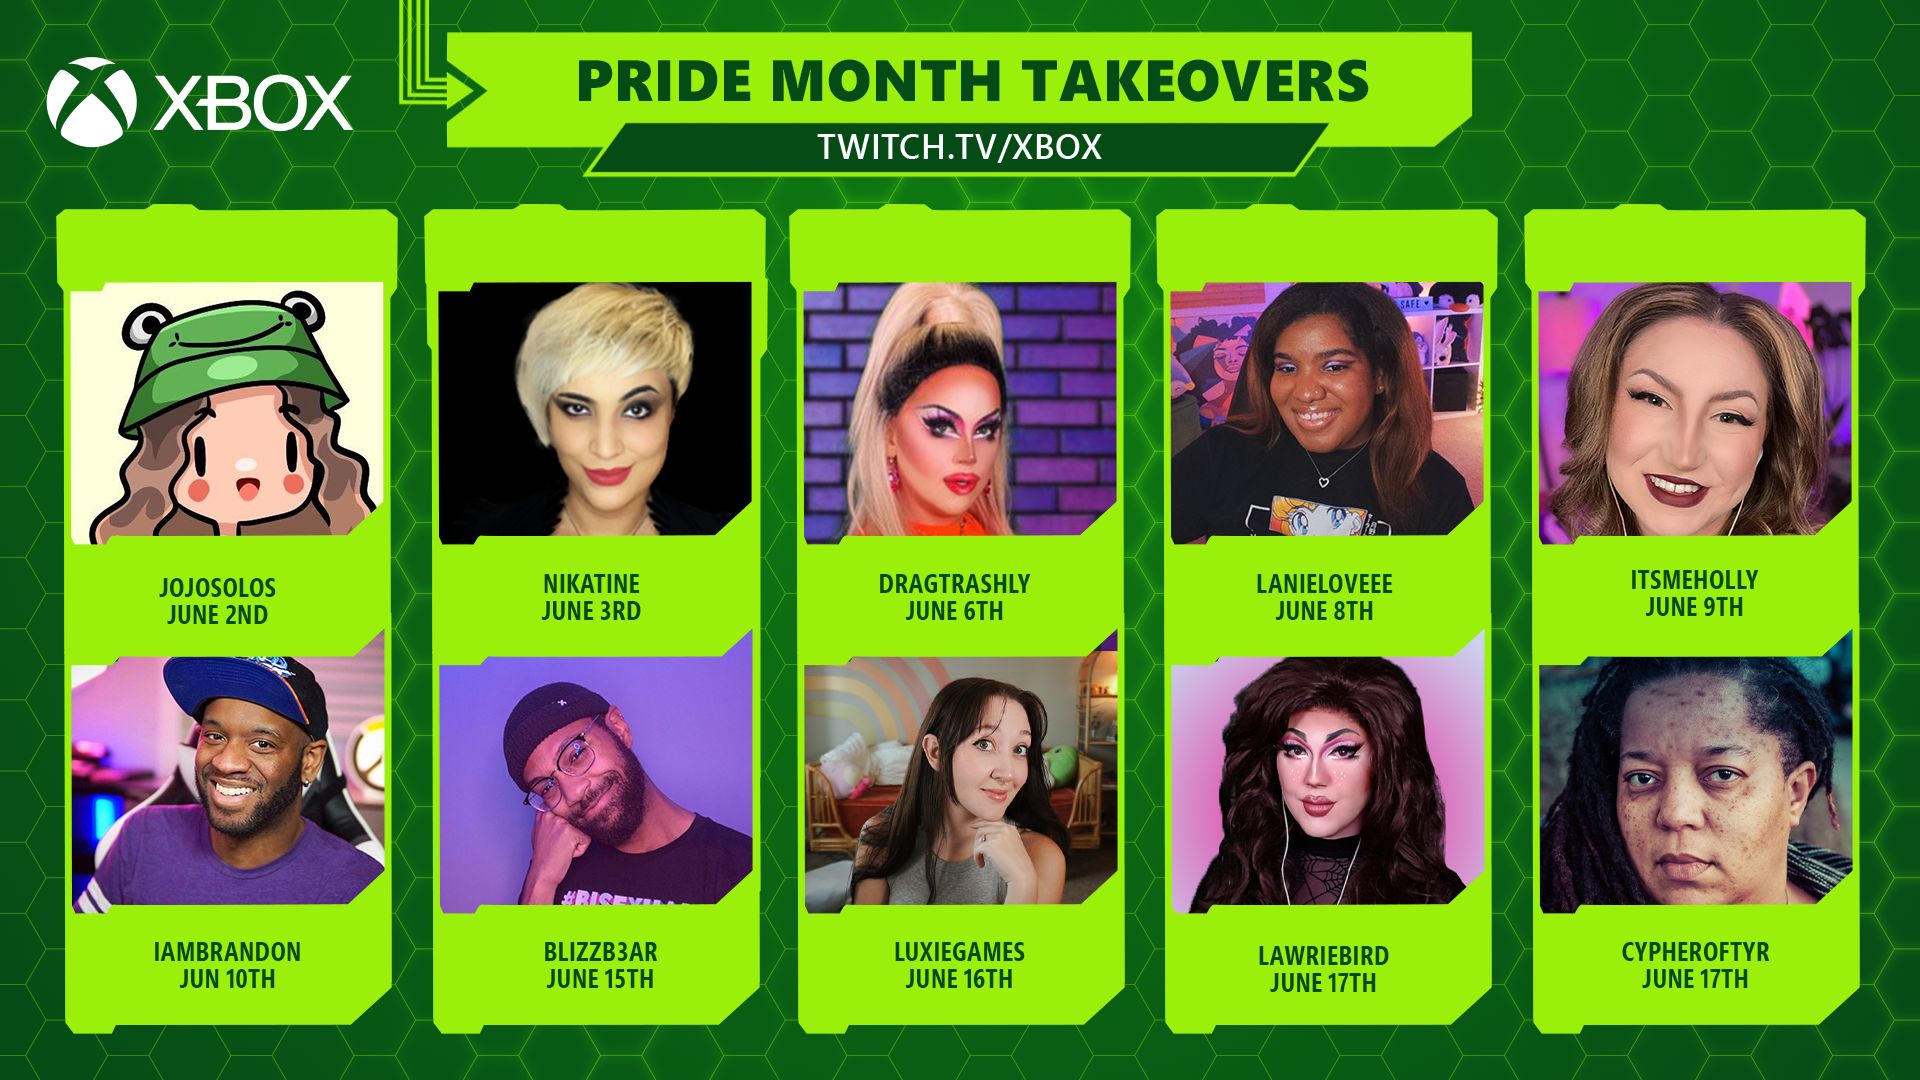 Dark and light green image with Xbox logos featuring pictures of five streamers – Jojosolos, Nikatine, Dragtrashly, Lanieloveee, Itsmeholly, IamBrandon, BlizzB3ar, LuxieGames, LawrieBird, and Cypheroftr